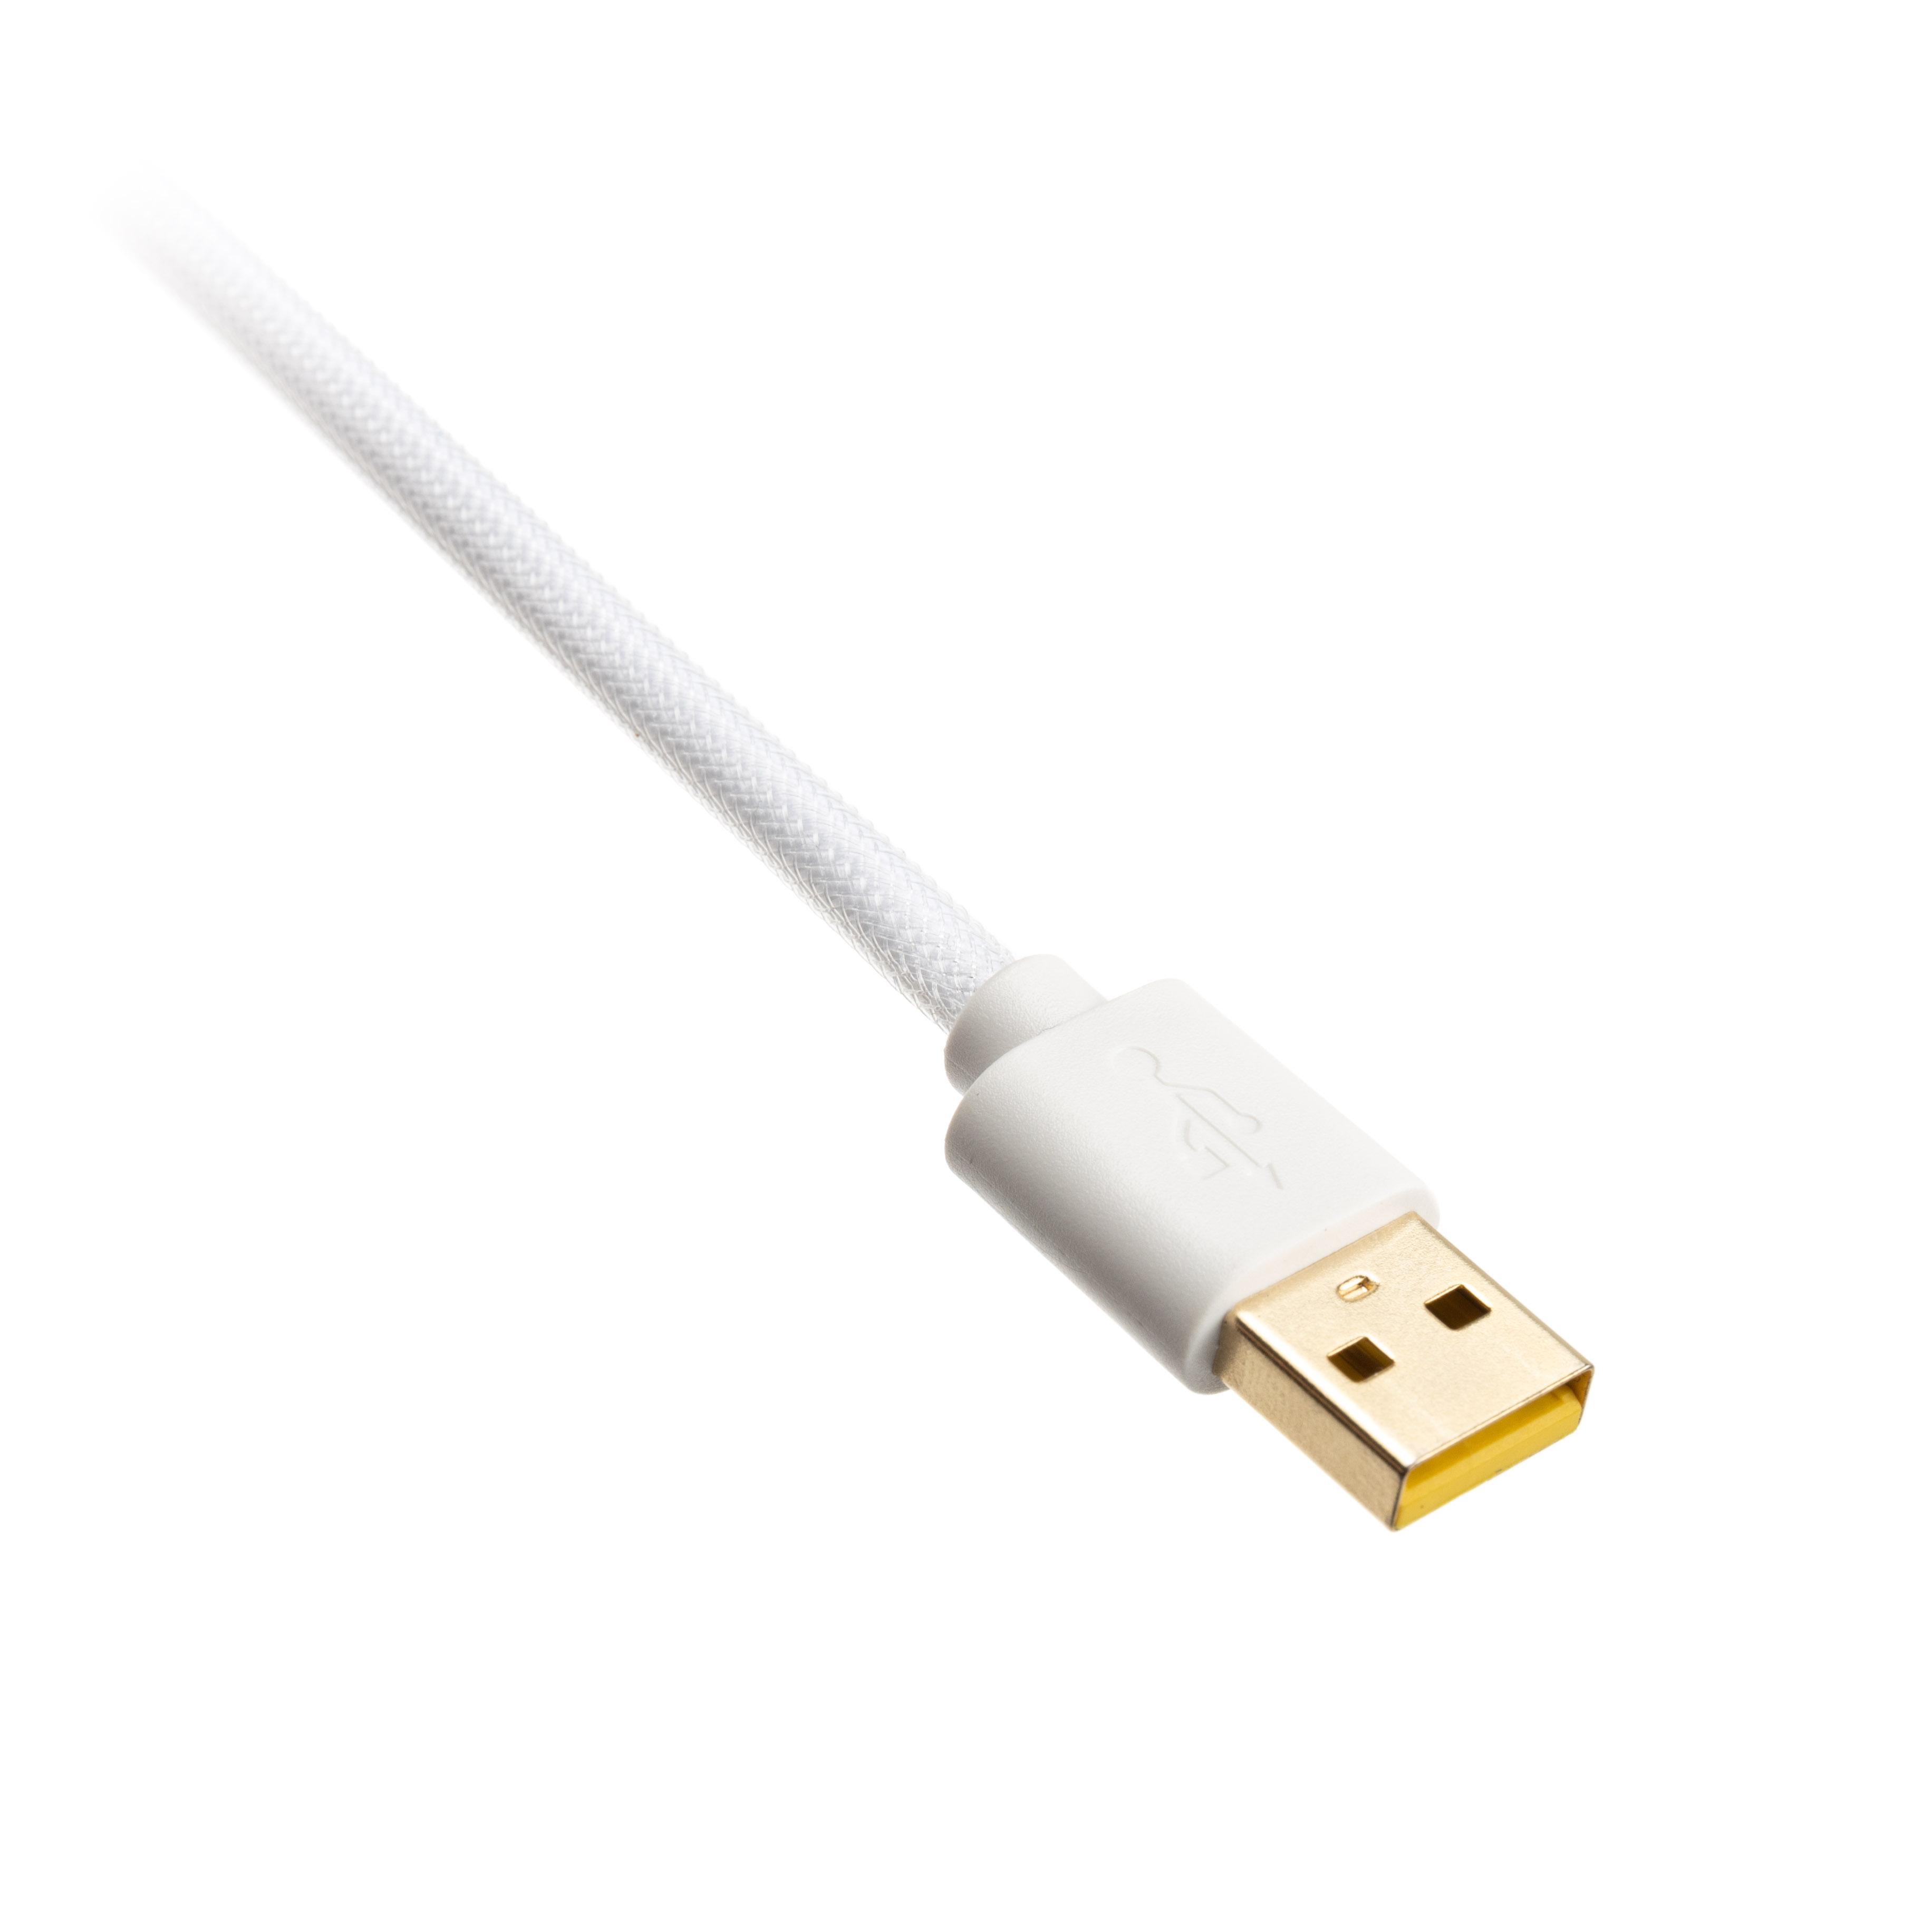 Ducky - Ducky Keyboard Coiled Cable V2 Pure White